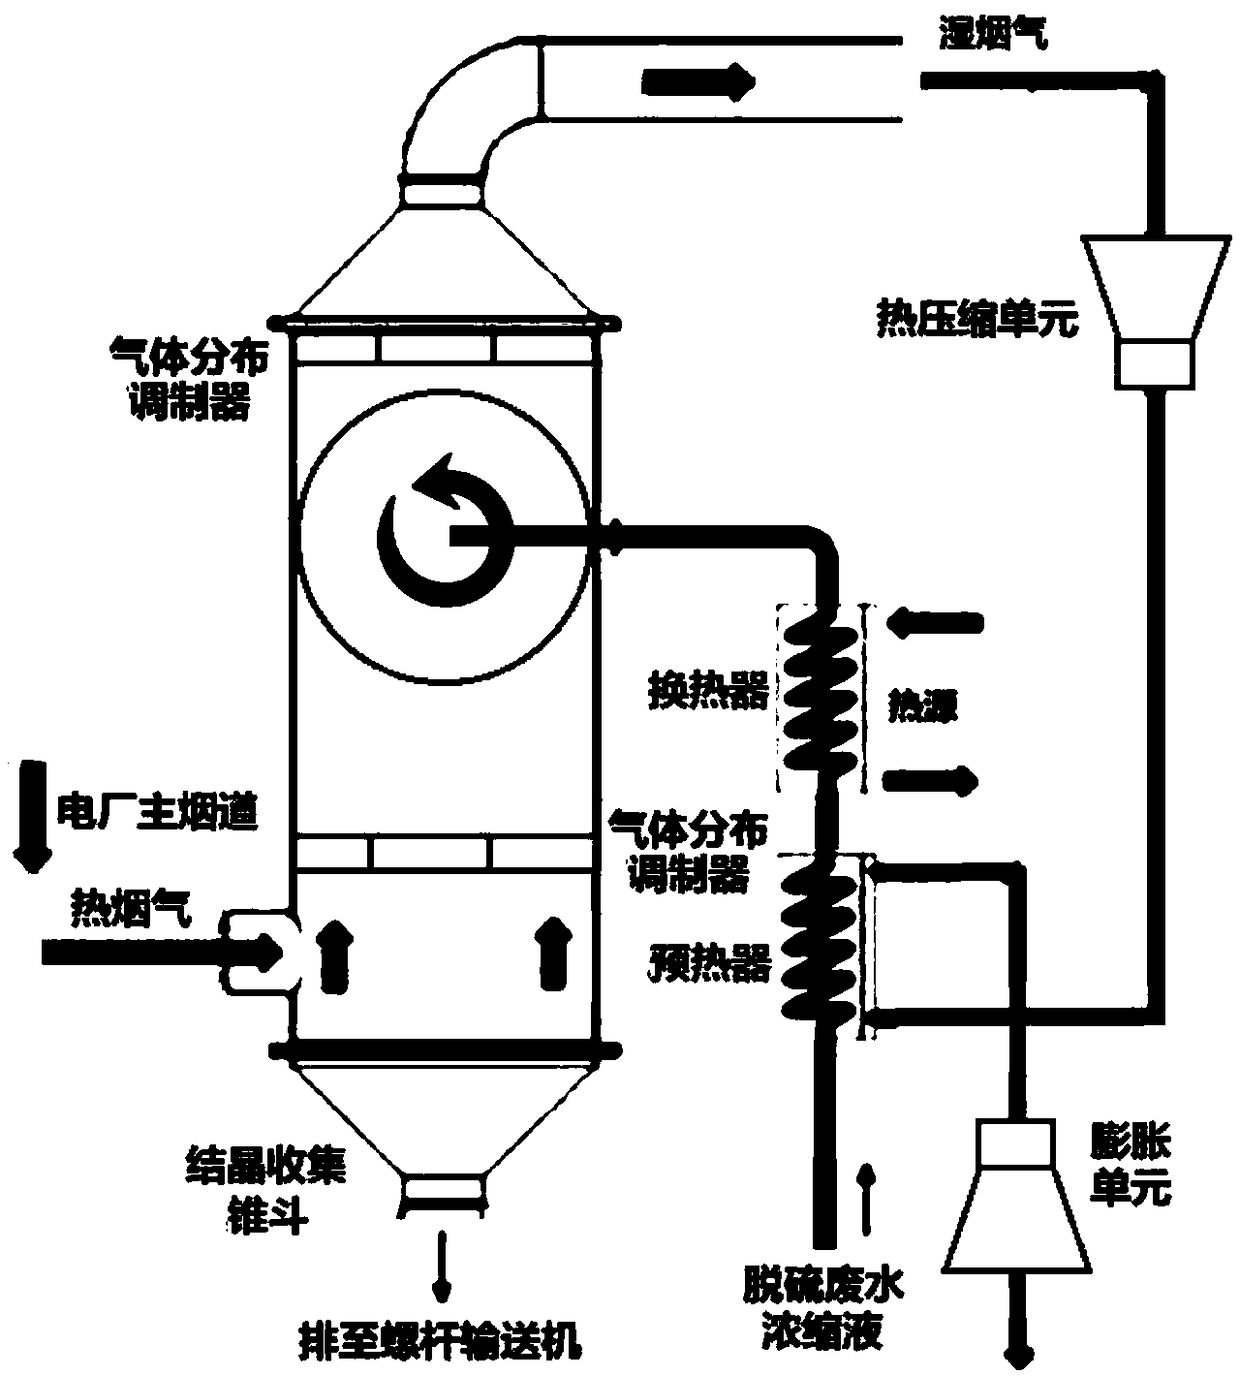 Wastewater concentrate fluidizing, crystallizing, and drying system and method of hot flue gas pressure variable discharge